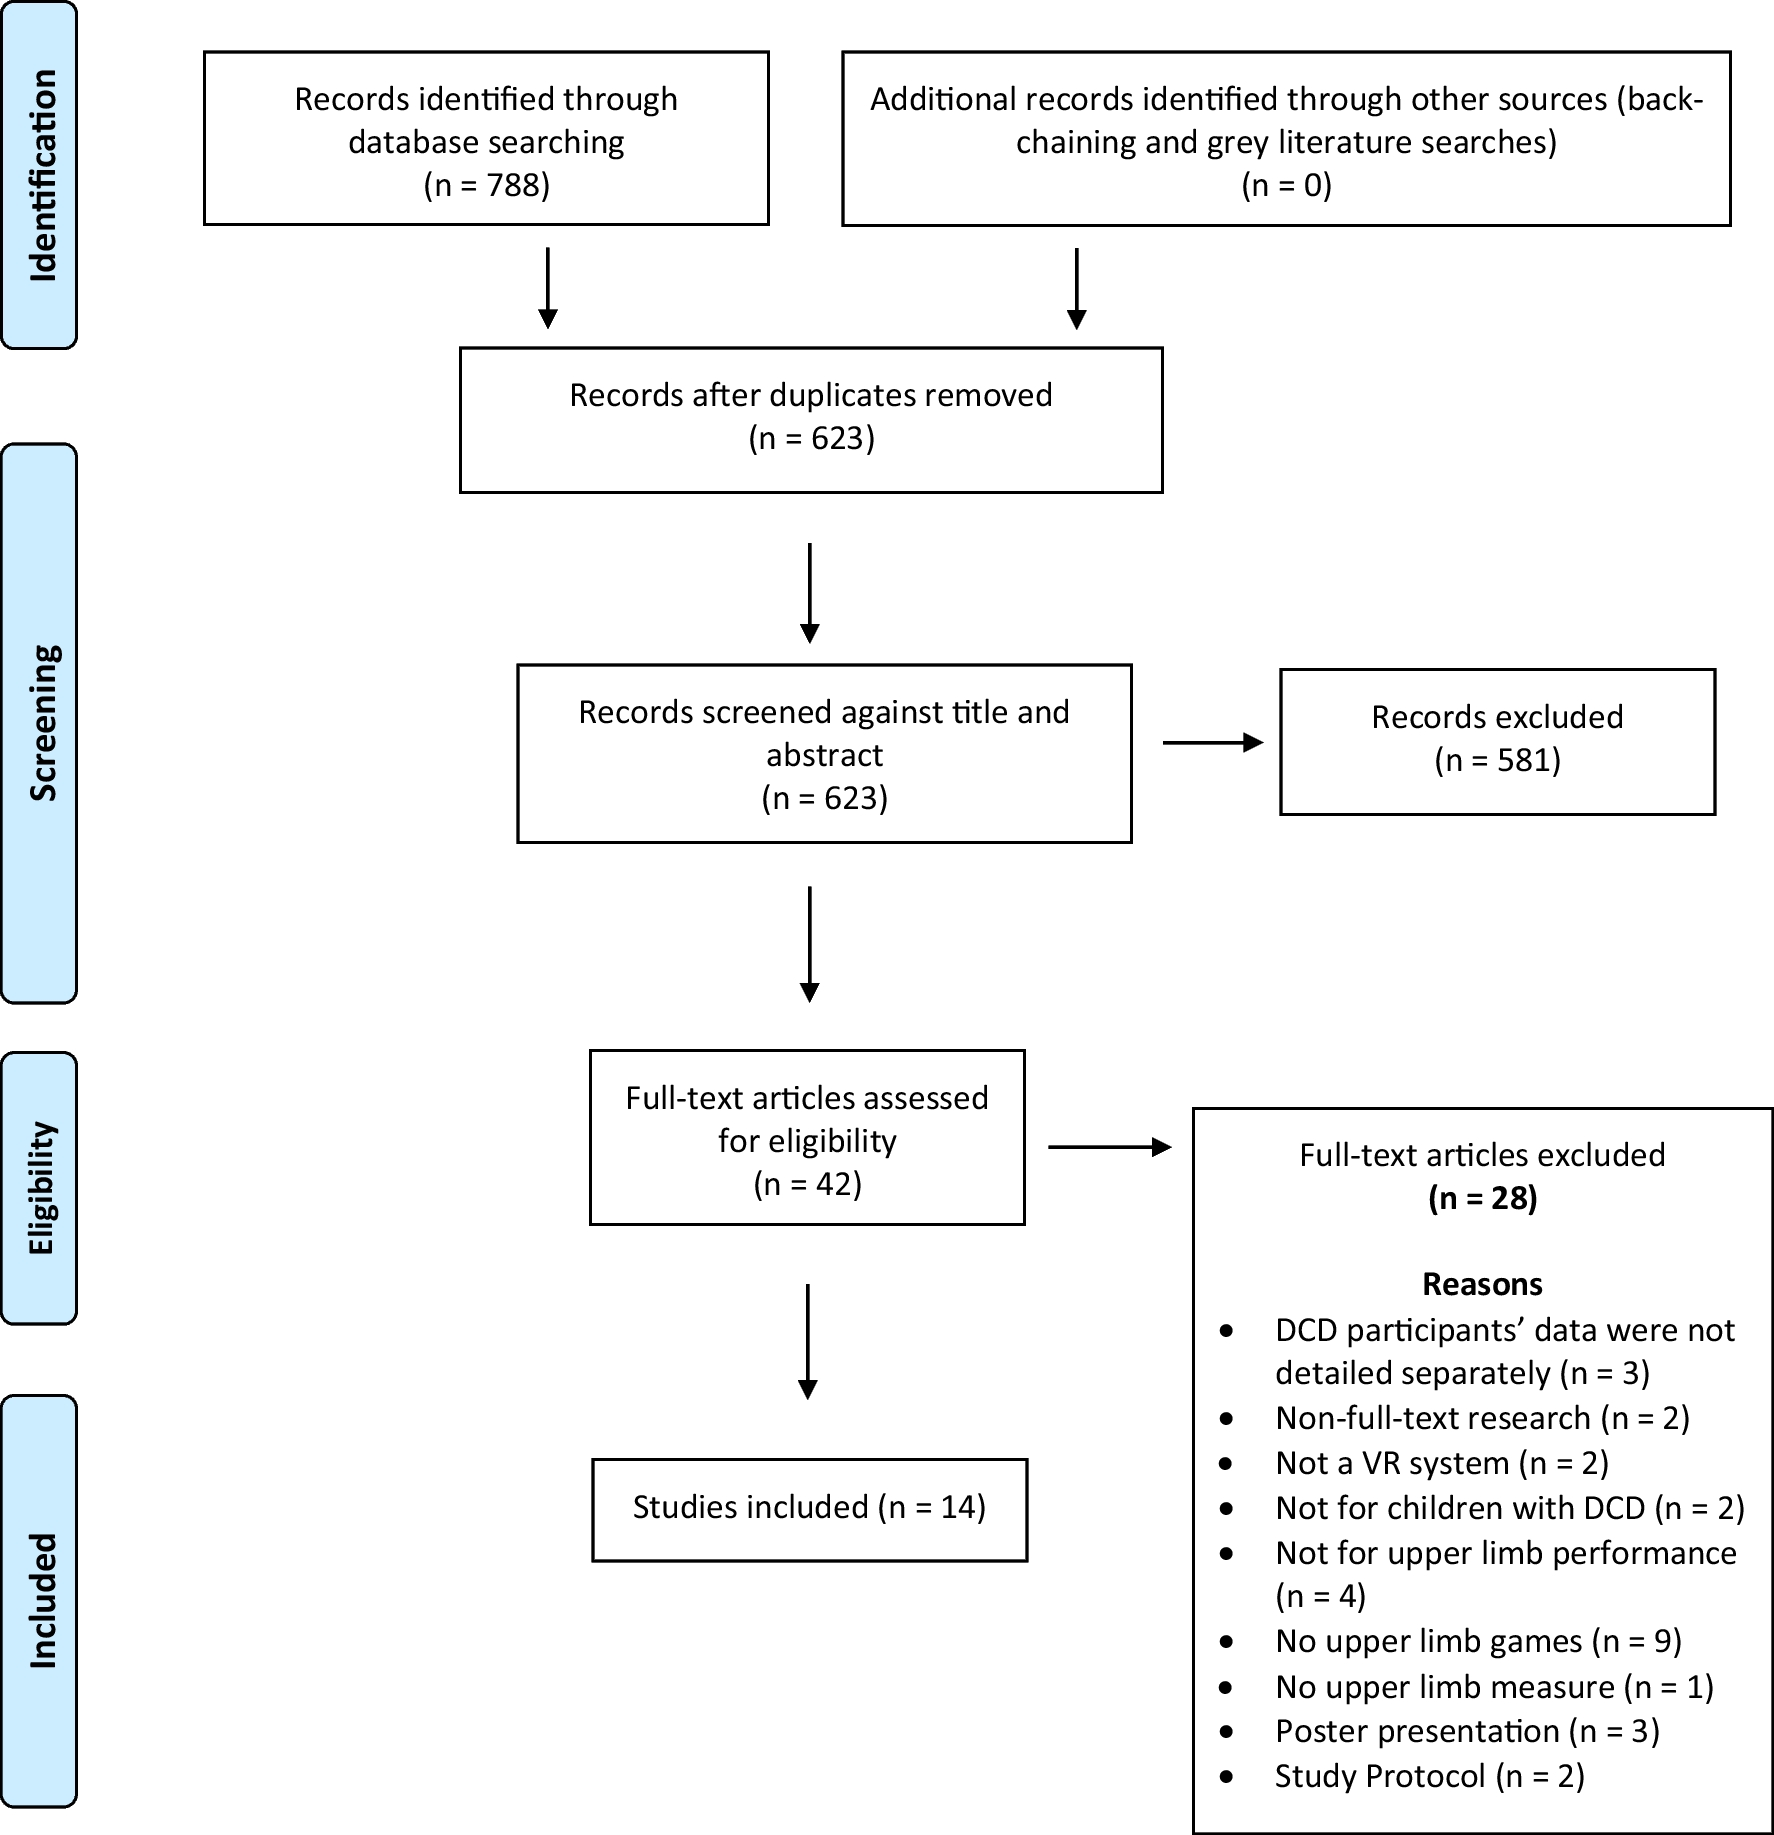 Evaluating the impact of virtual reality game training on upper limb motor performance in children and adolescents with developmental coordination disorder: a scoping review using the ICF framework